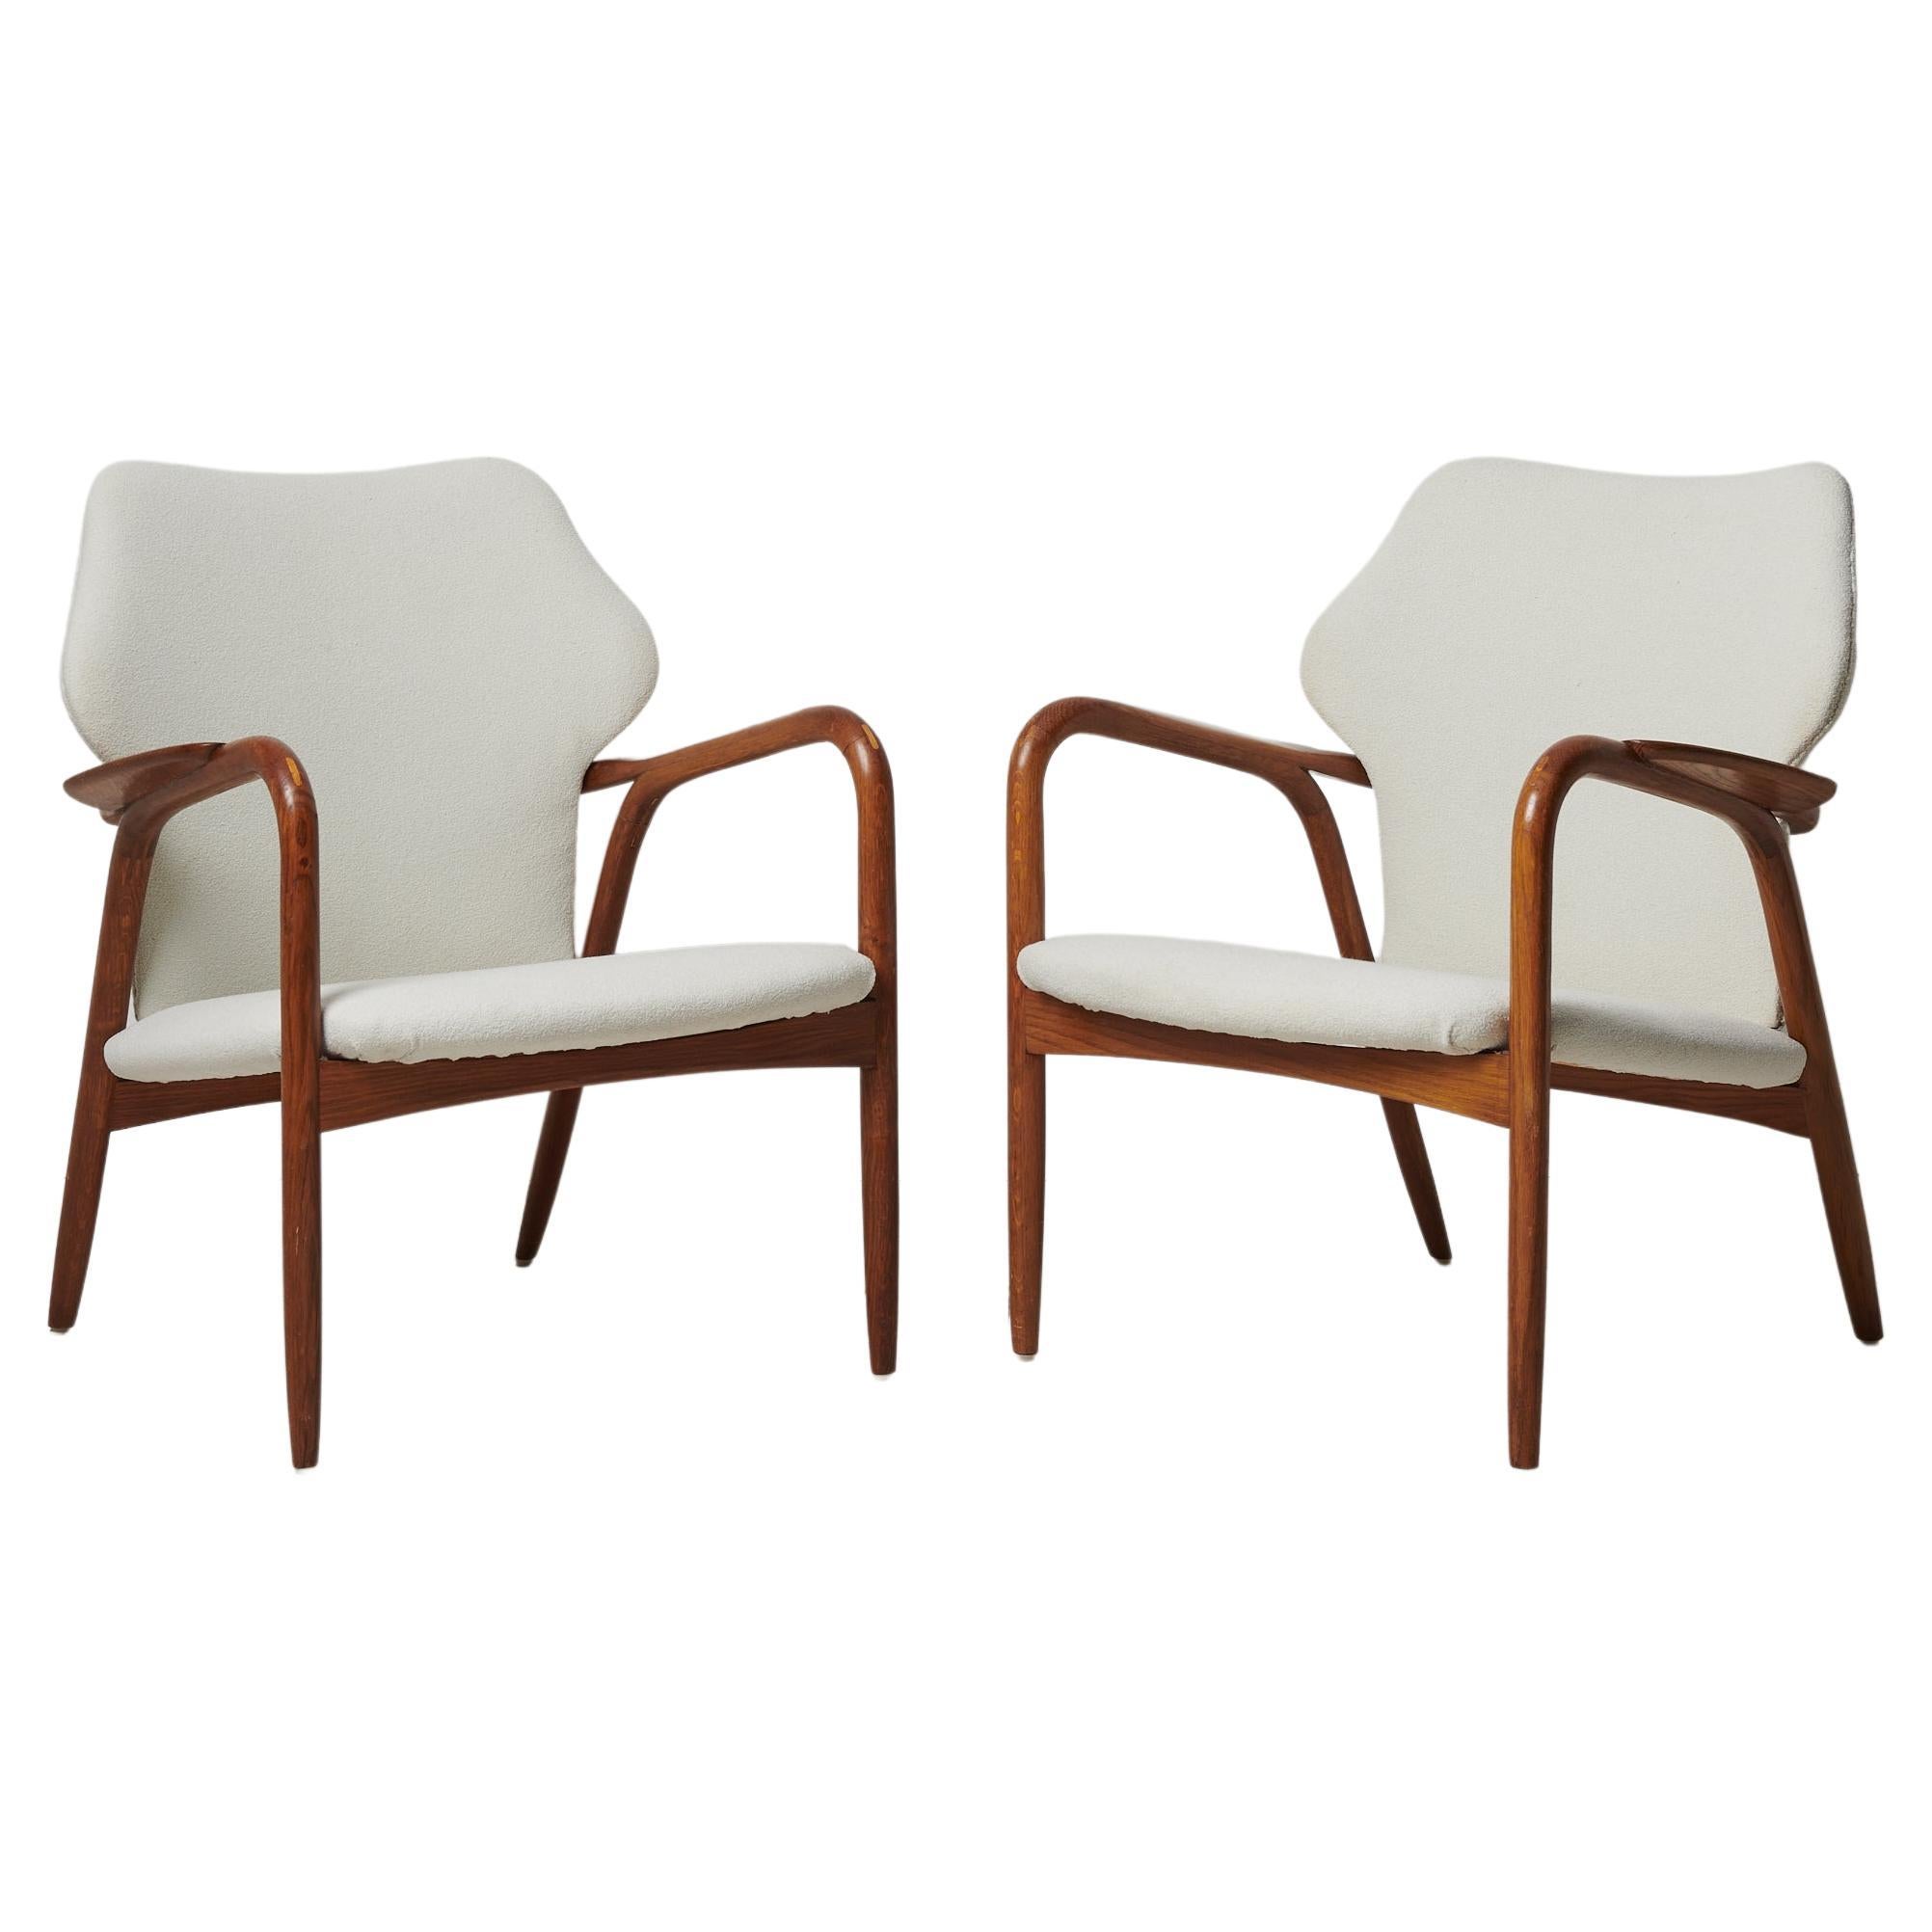 Pair of Swedish Modern Upholstered White Armchairs For Sale